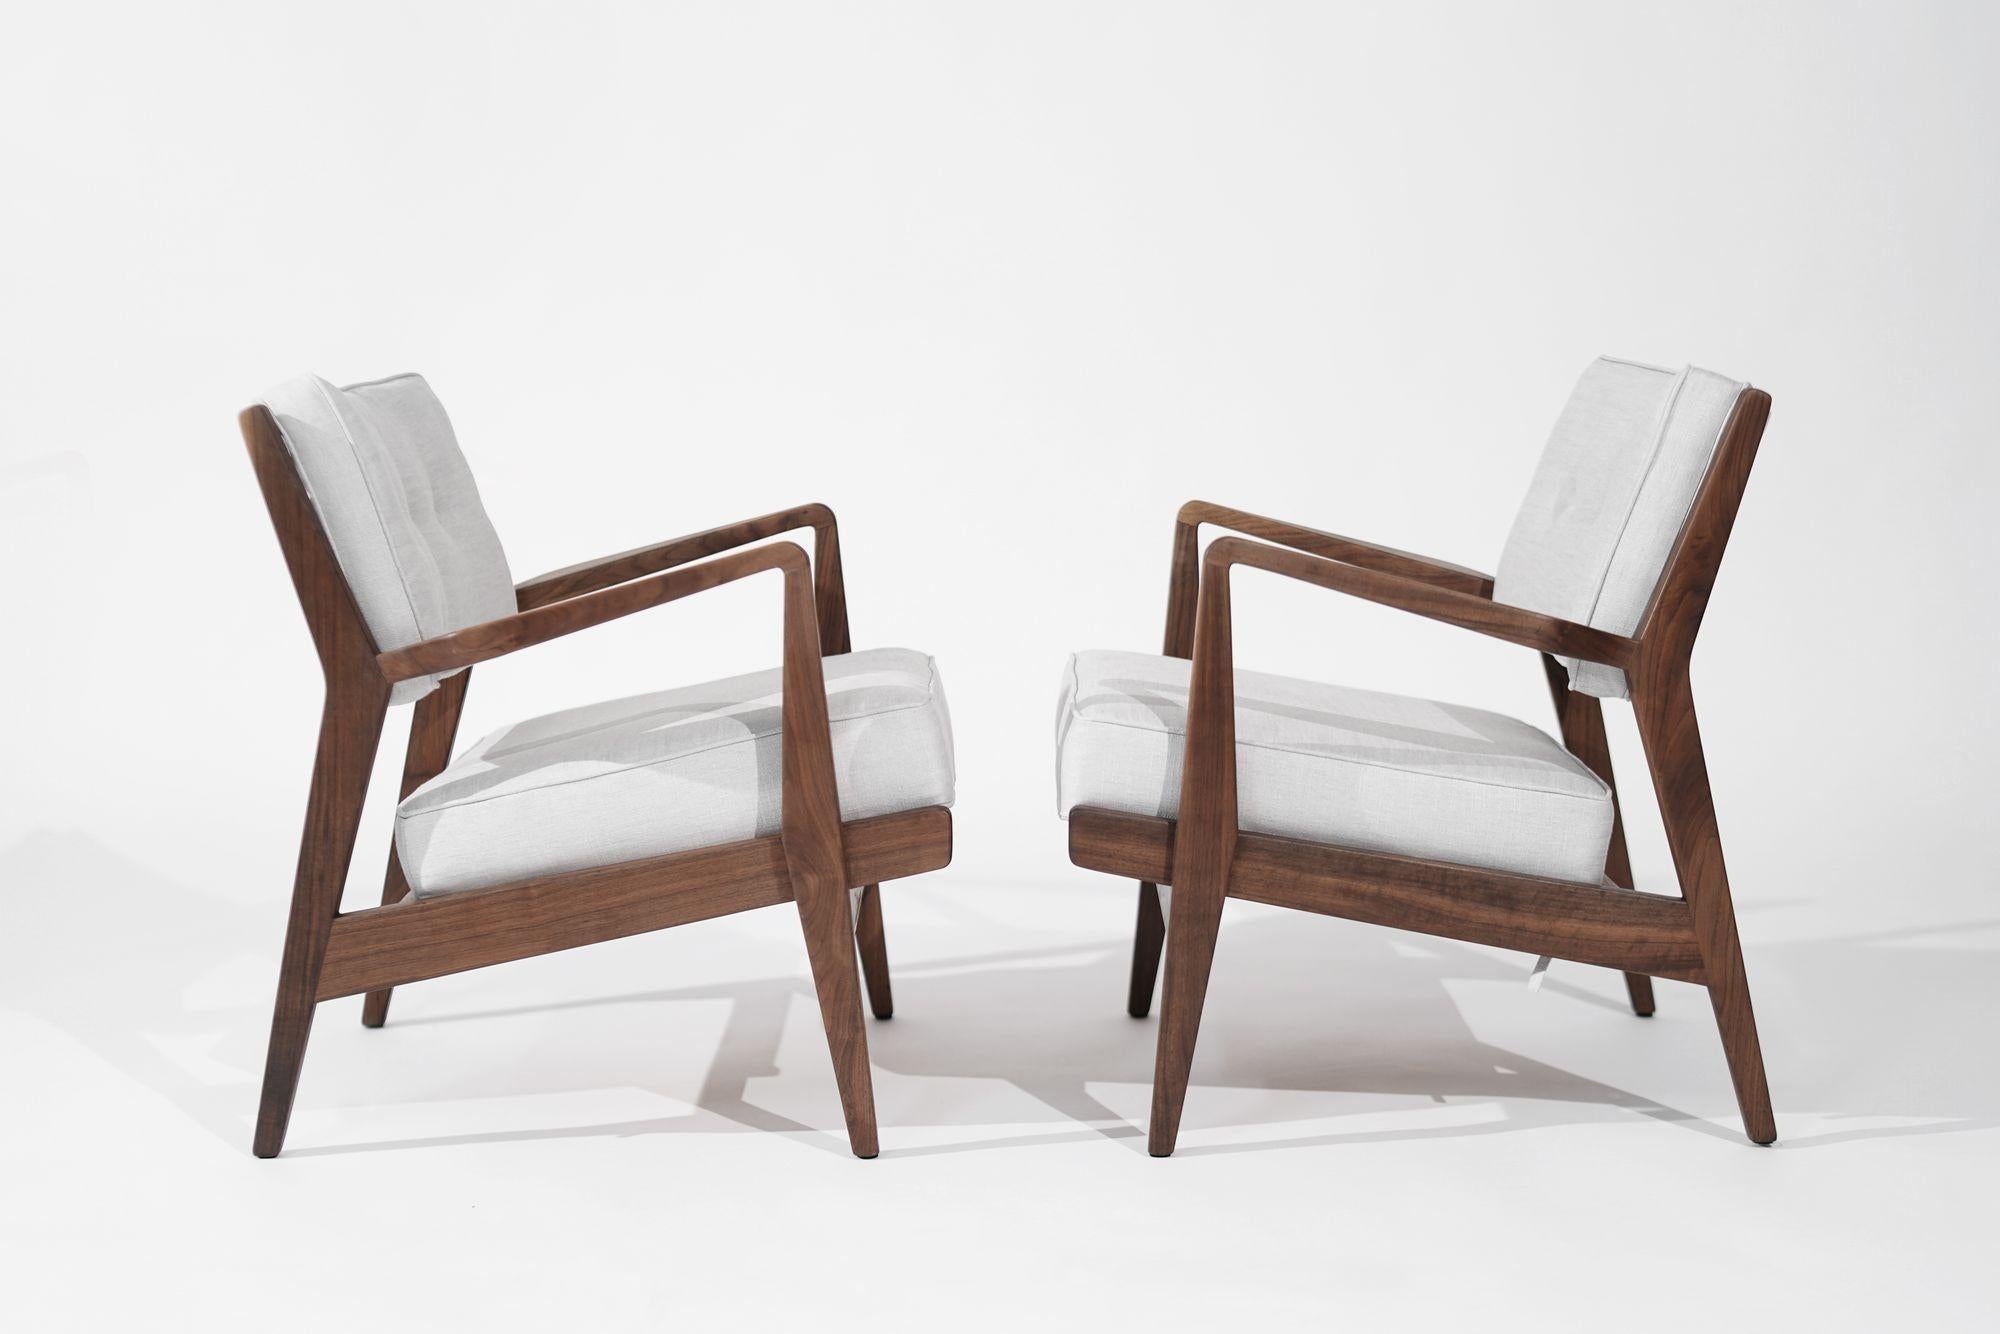 Experience the epitome of mid-century modern elegance with our fully restored walnut lounge chairs from the 1950s, a timeless creation by Jens Risom for Risom, Inc. Meticulously refurbished and reupholstered in luxurious Gray Linen, these chairs